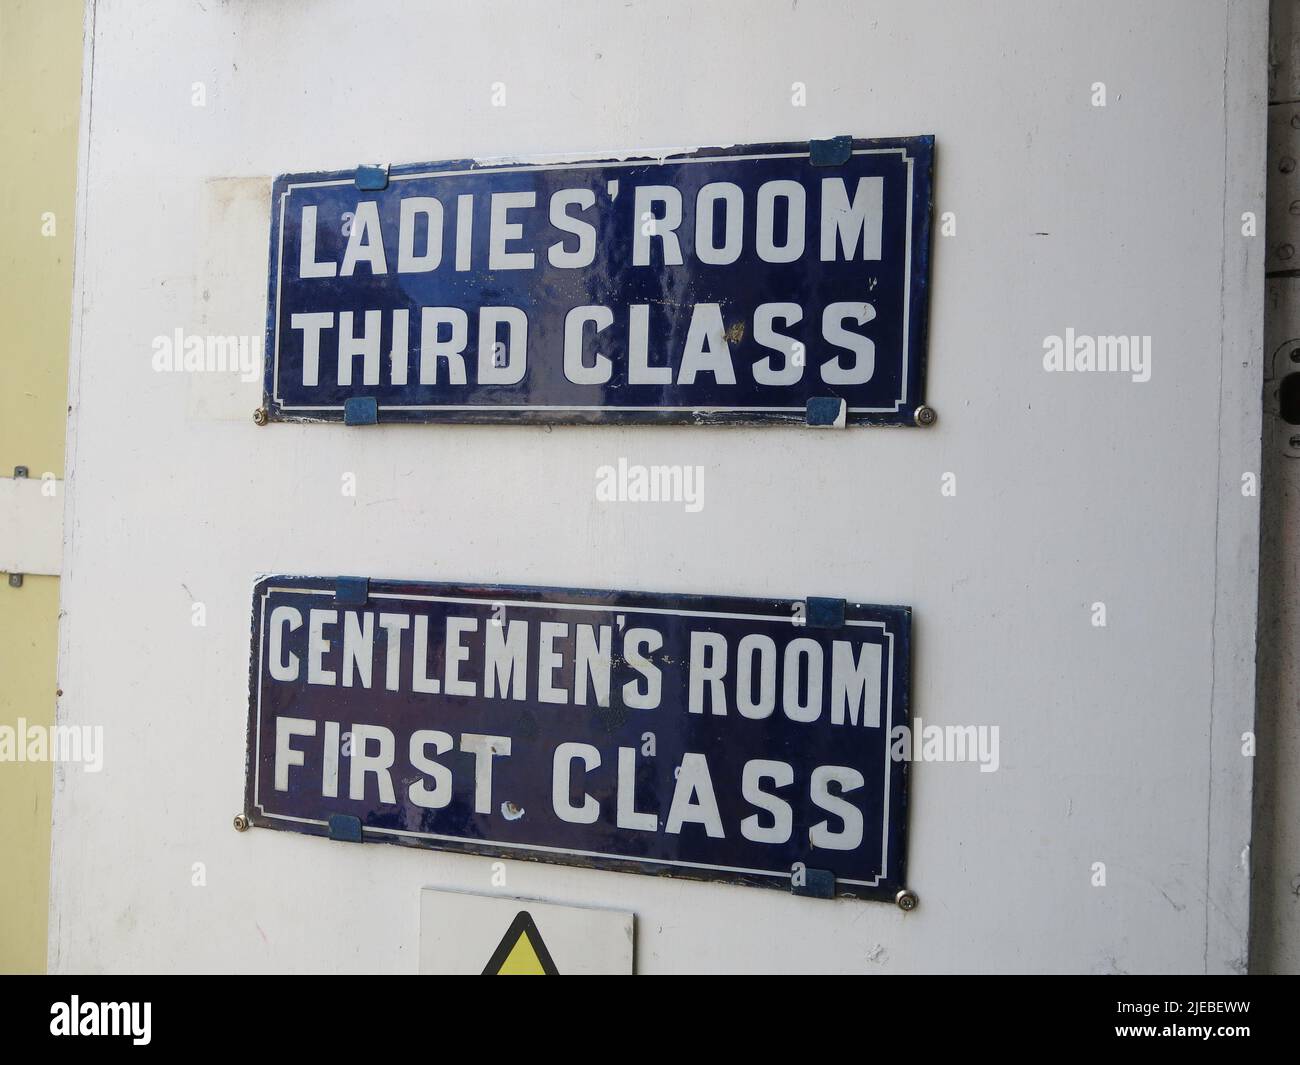 Vintage signs from old railway stations to convey female inequality: 'Ladies' Room Third Class'; 'Gentlemen's Room First Class' Stock Photo